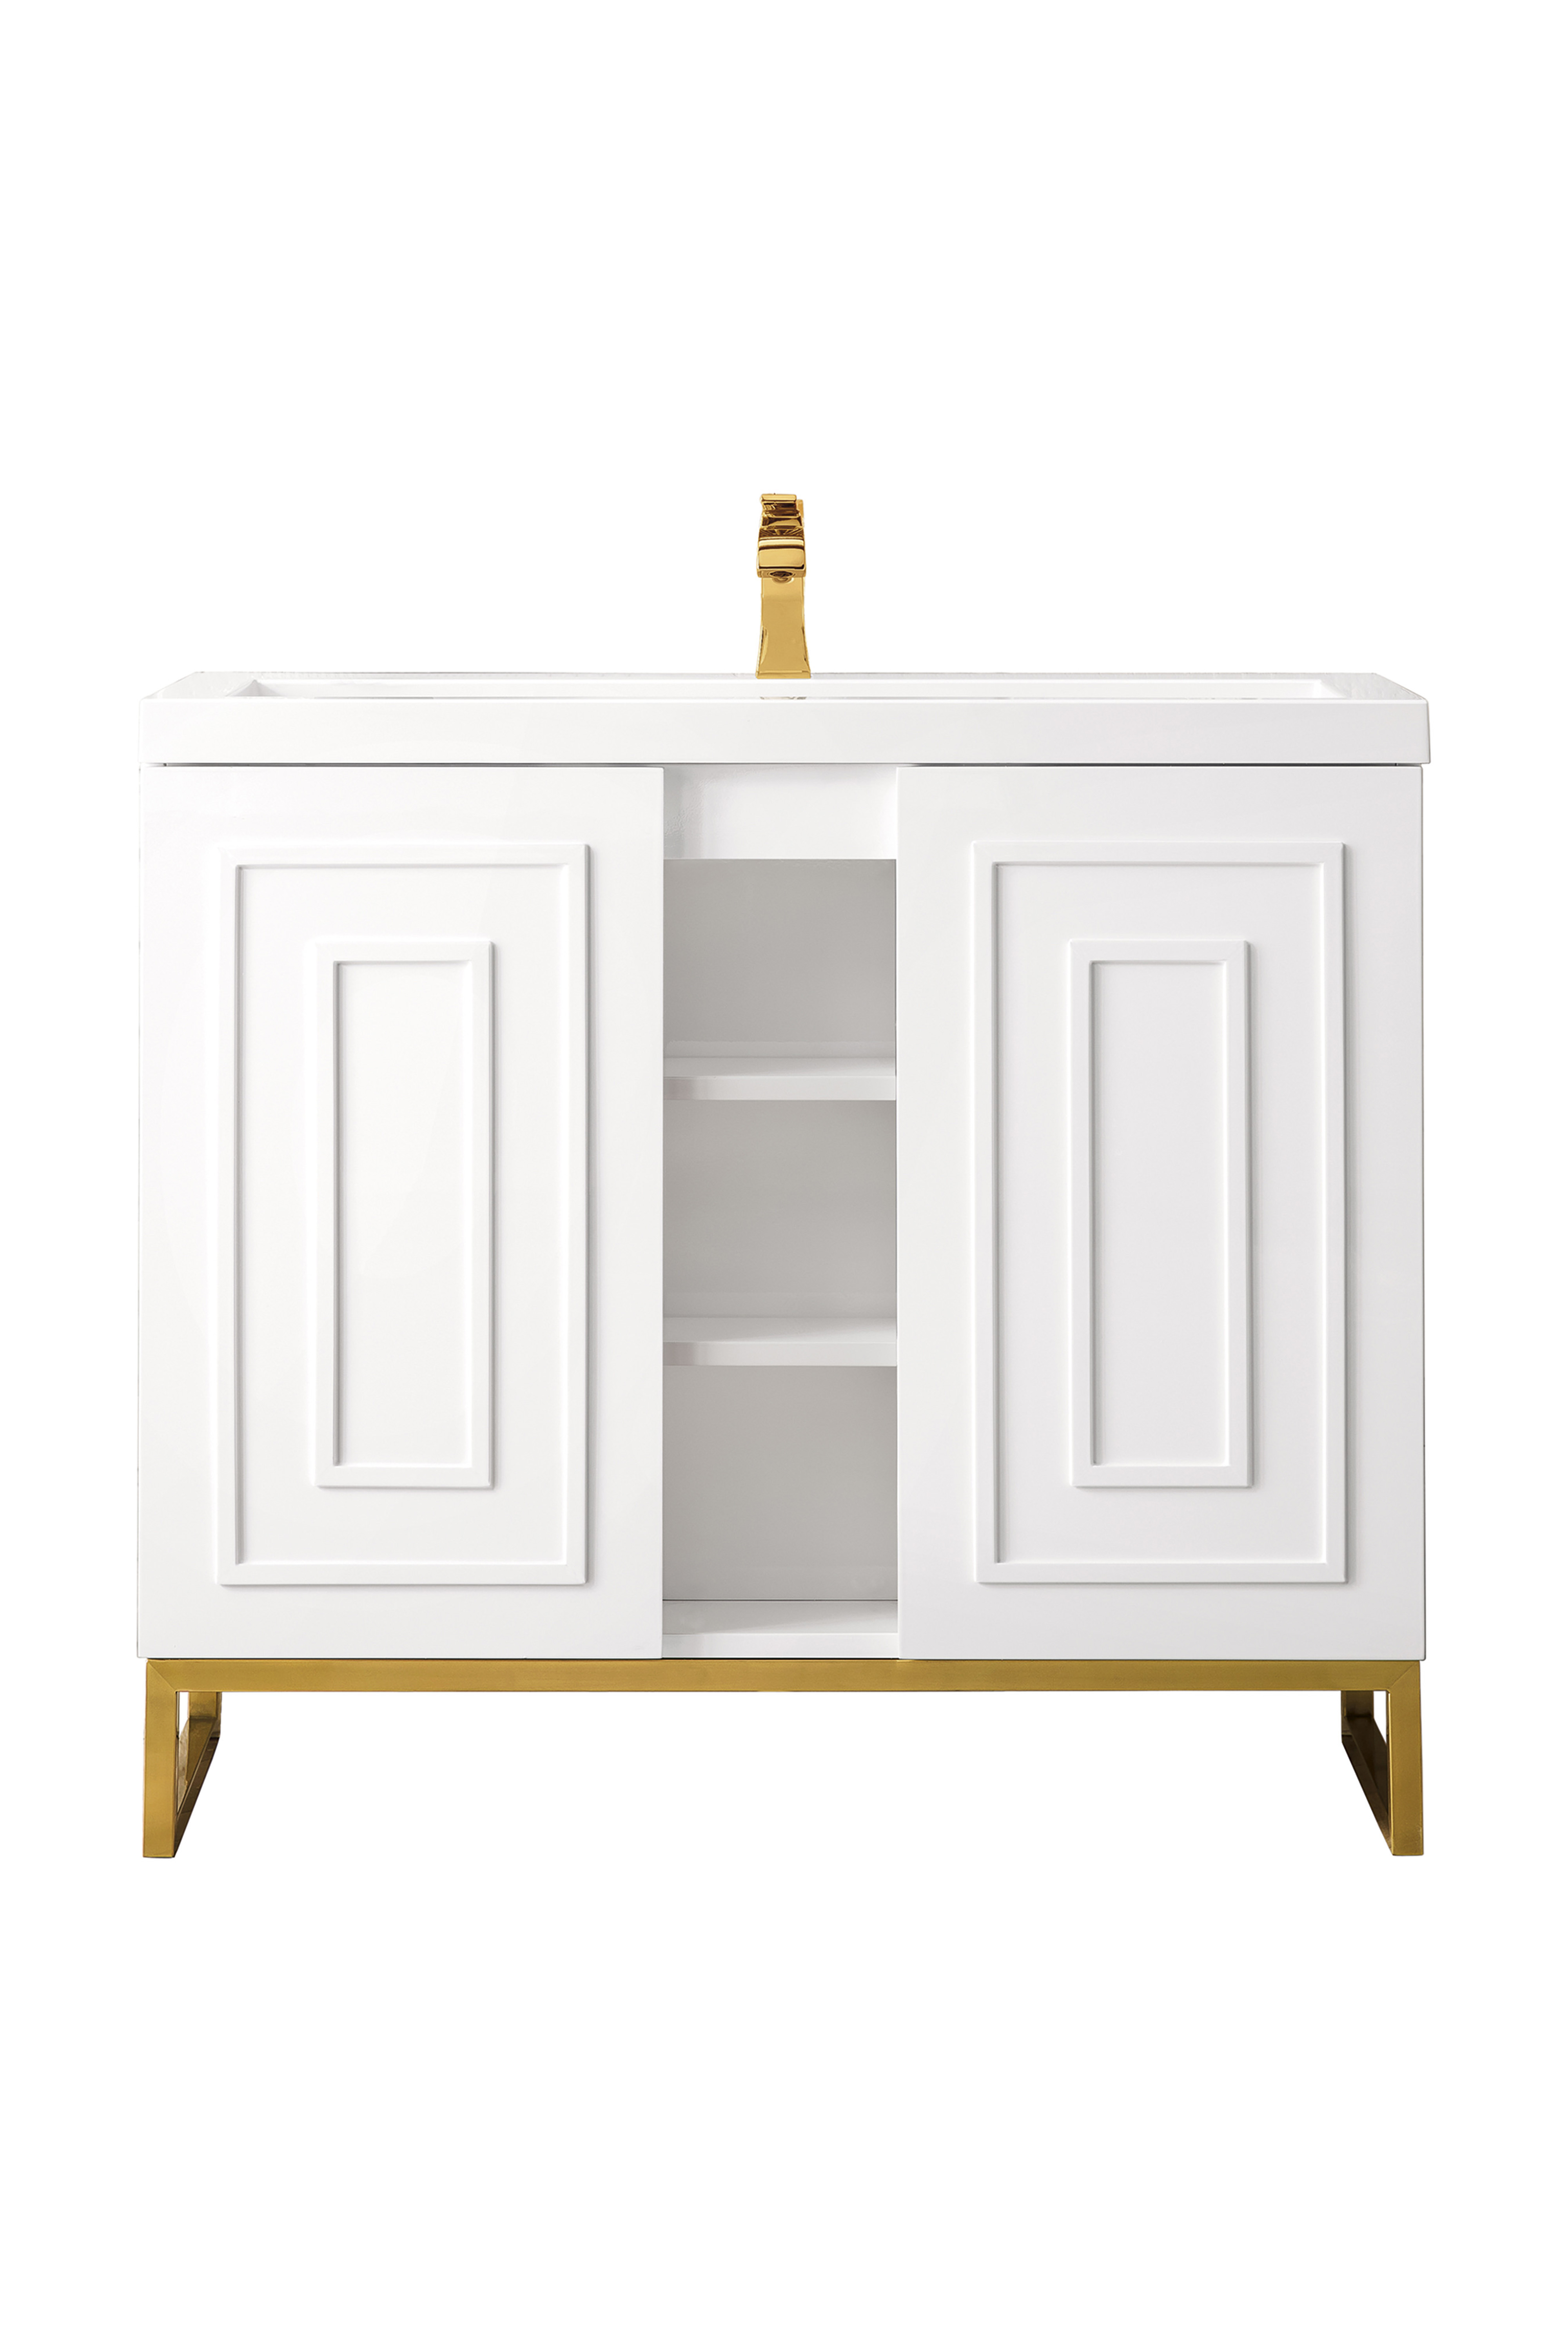 James Martin E110V39.5GWRGDWG Alicante' 39.5" Single Vanity Cabinet, Glossy White, Radiant Gold w/White Glossy Composite Countertop